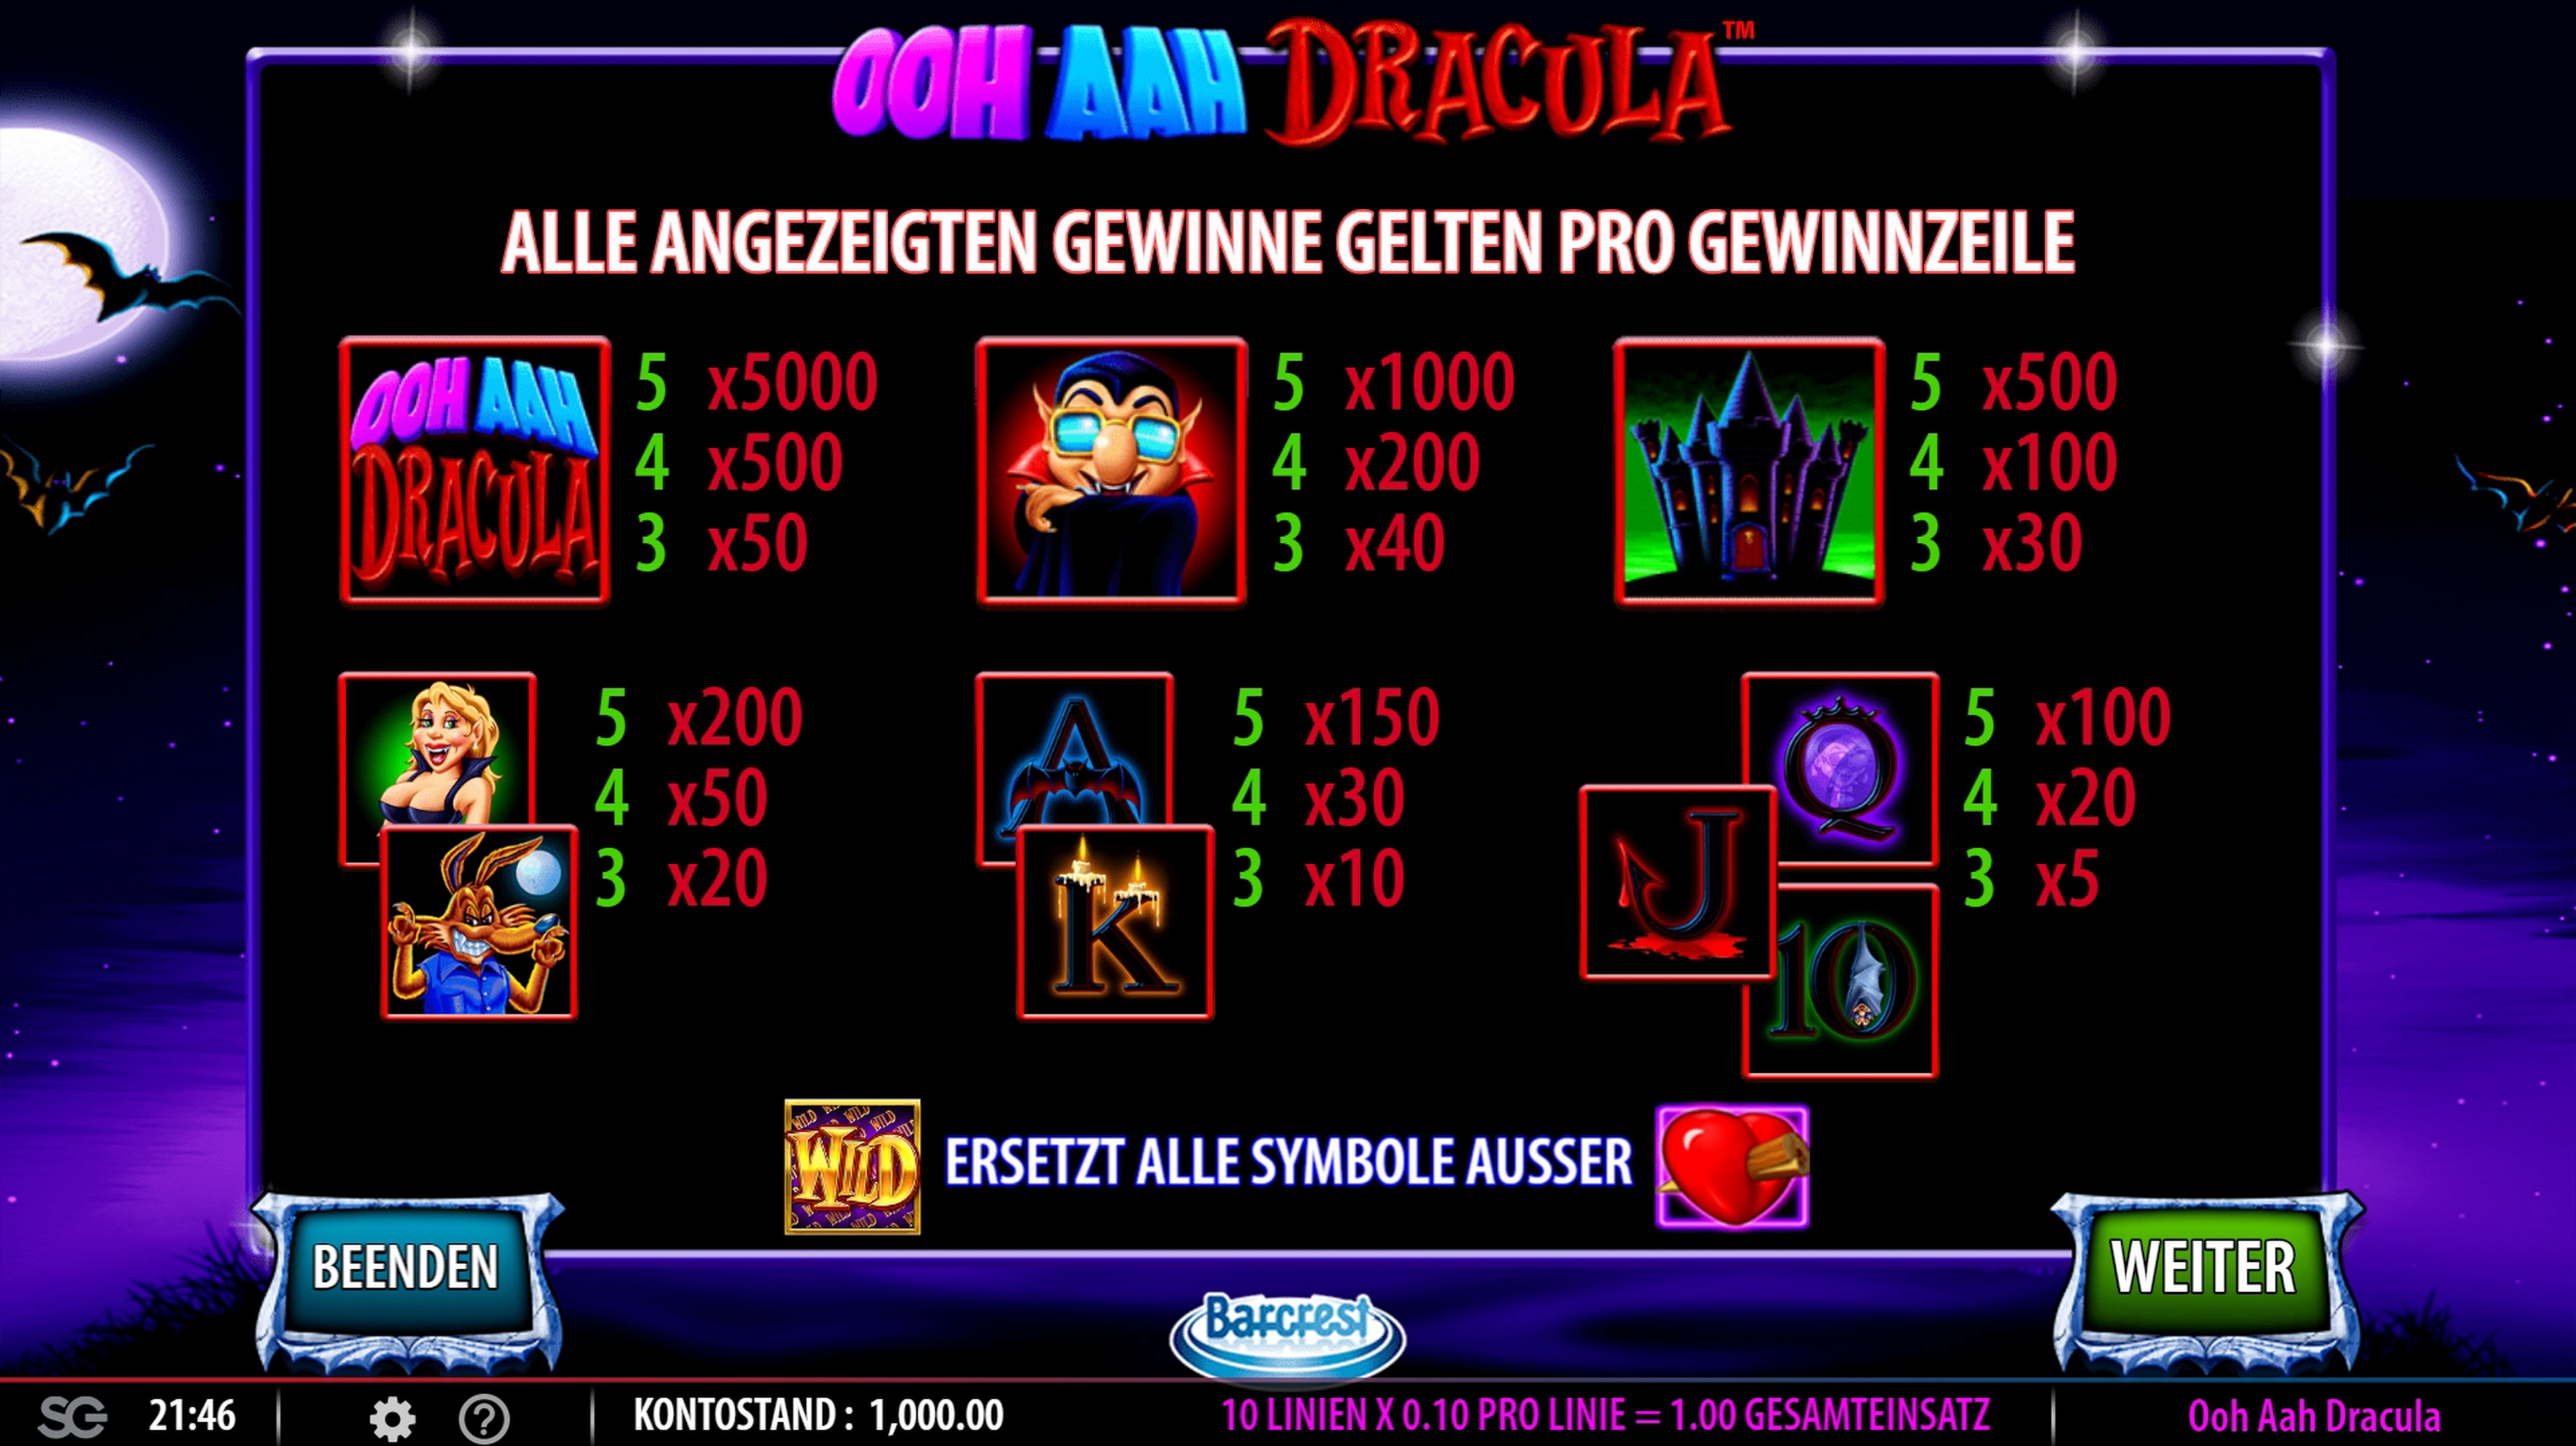 Info of Ooh Aah Dracula Slot Game by Barcrest Games